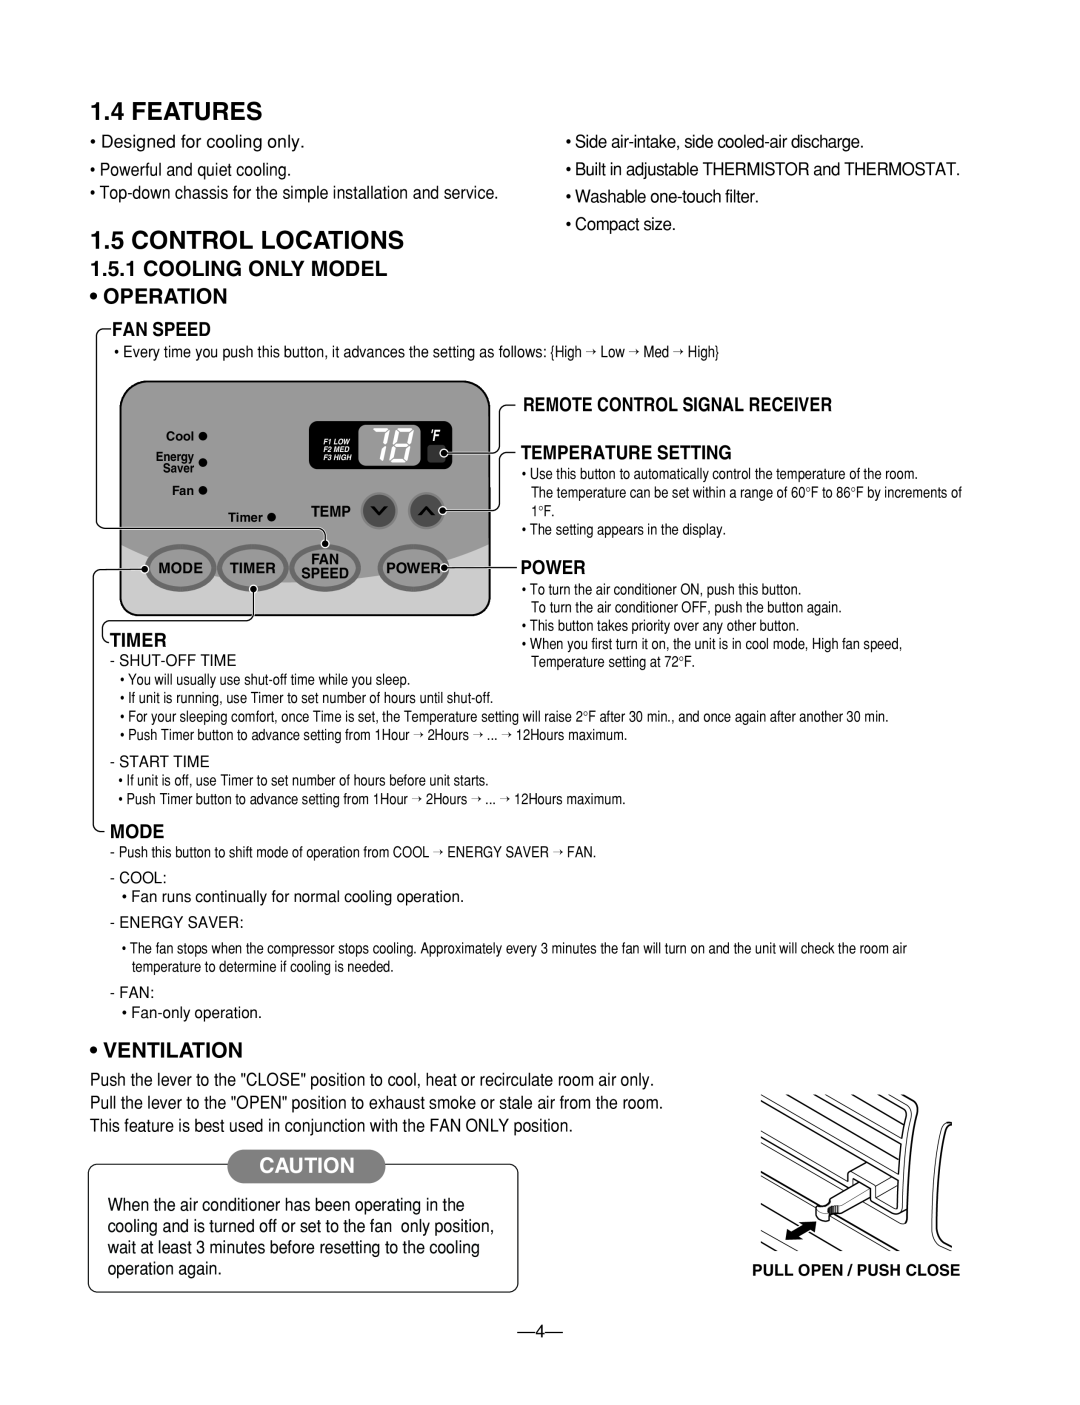 Heat Controller BG-123A Features, Control Locations, 1.5.1COOLING ONLY MODEL OPERATION, Ventilation, Fan Speed, Timer 